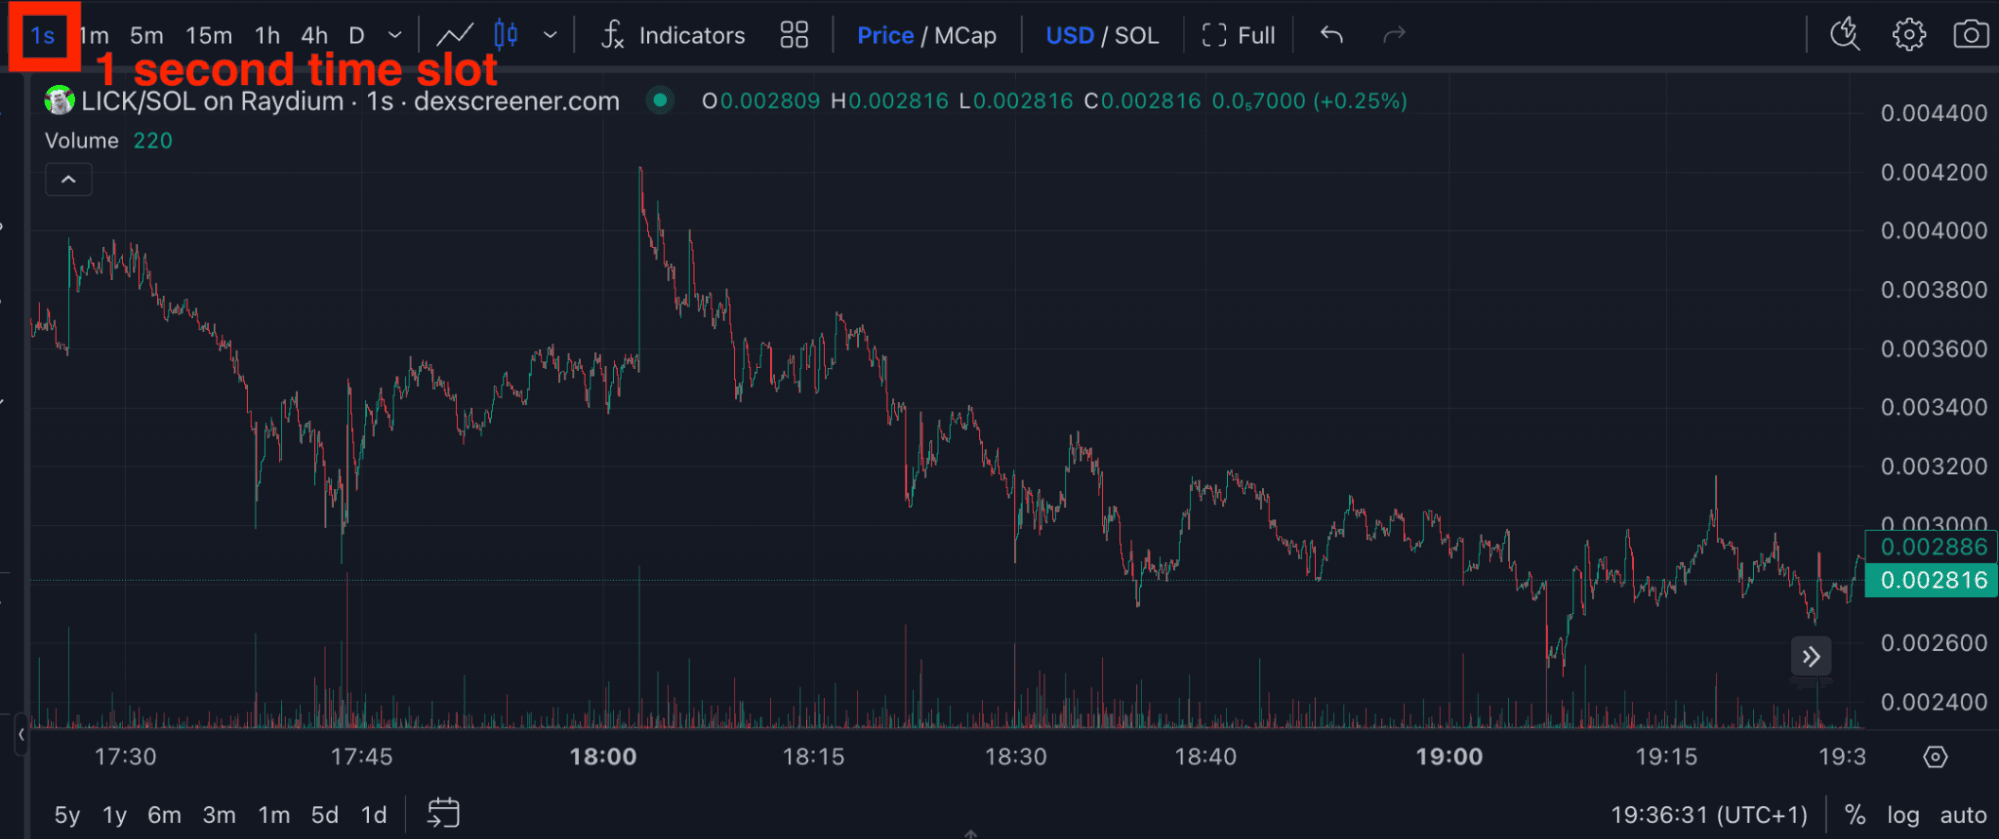 one second time slot on tradingview - image27.png